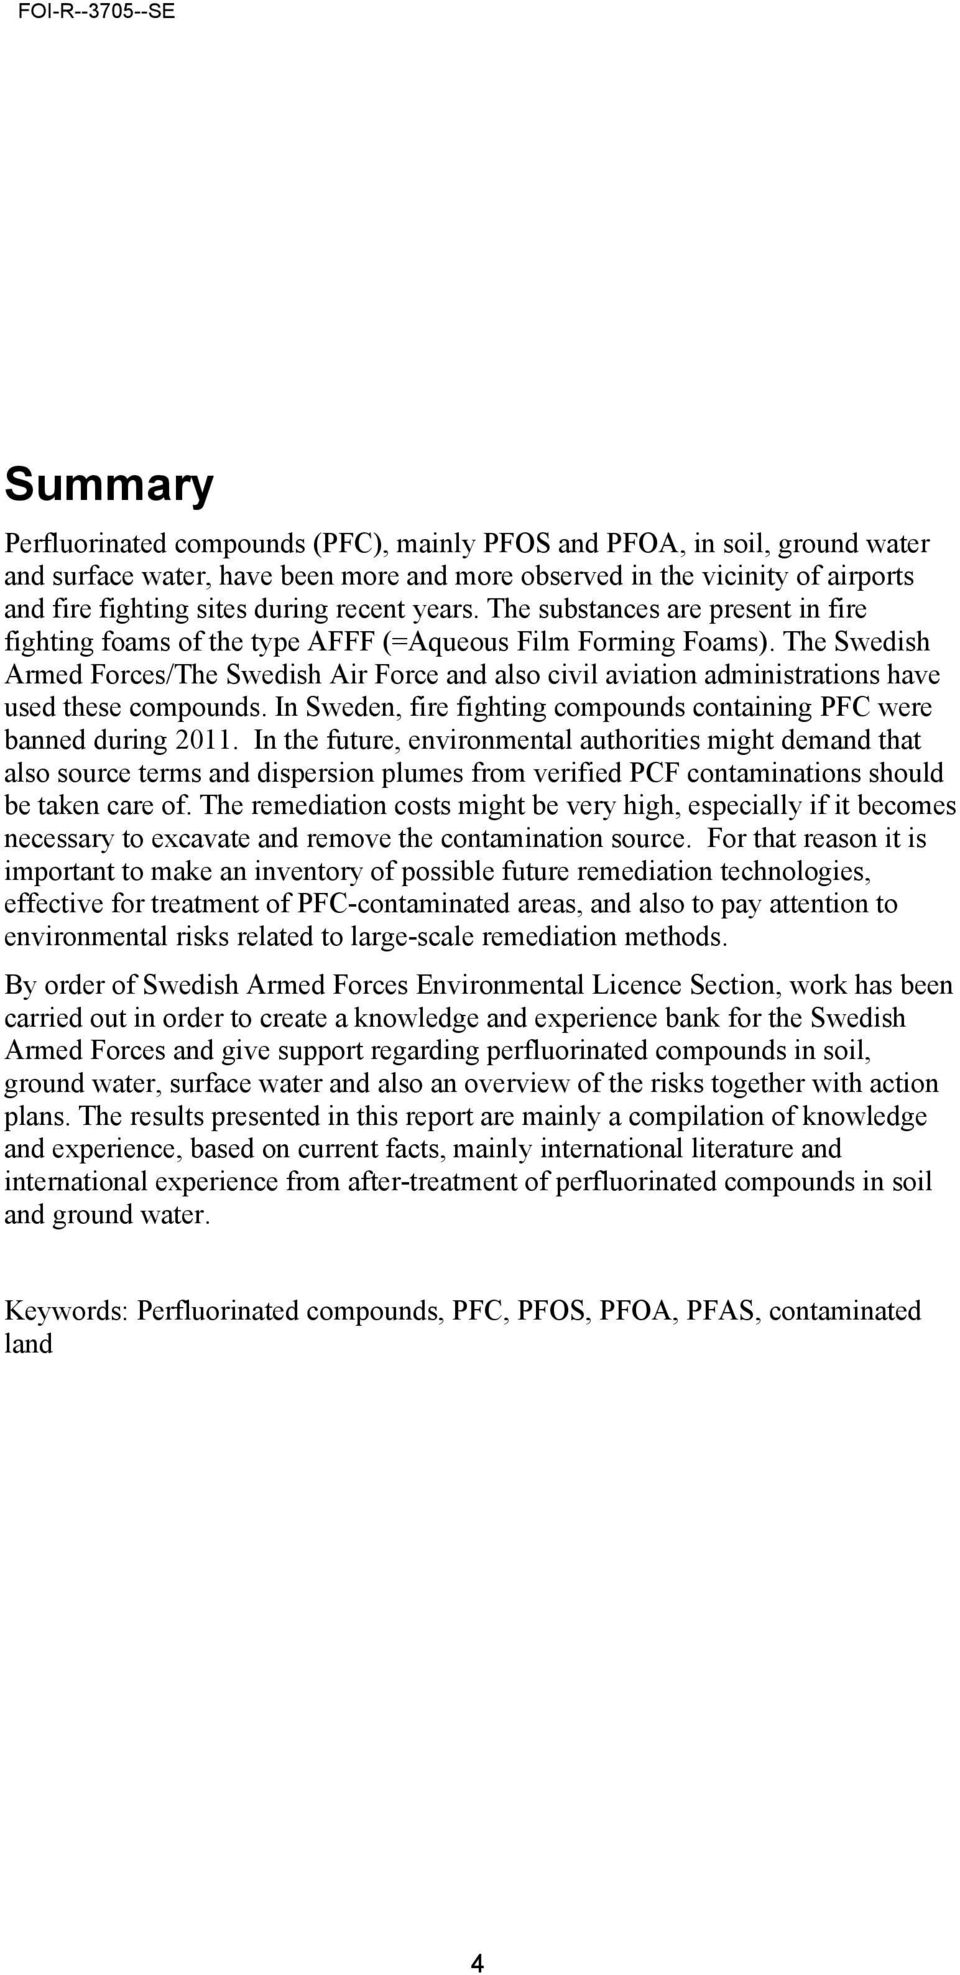 The Swedish Armed Forces/The Swedish Air Force and also civil aviation administrations have used these compounds. In Sweden, fire fighting compounds containing PFC were banned during 2011.